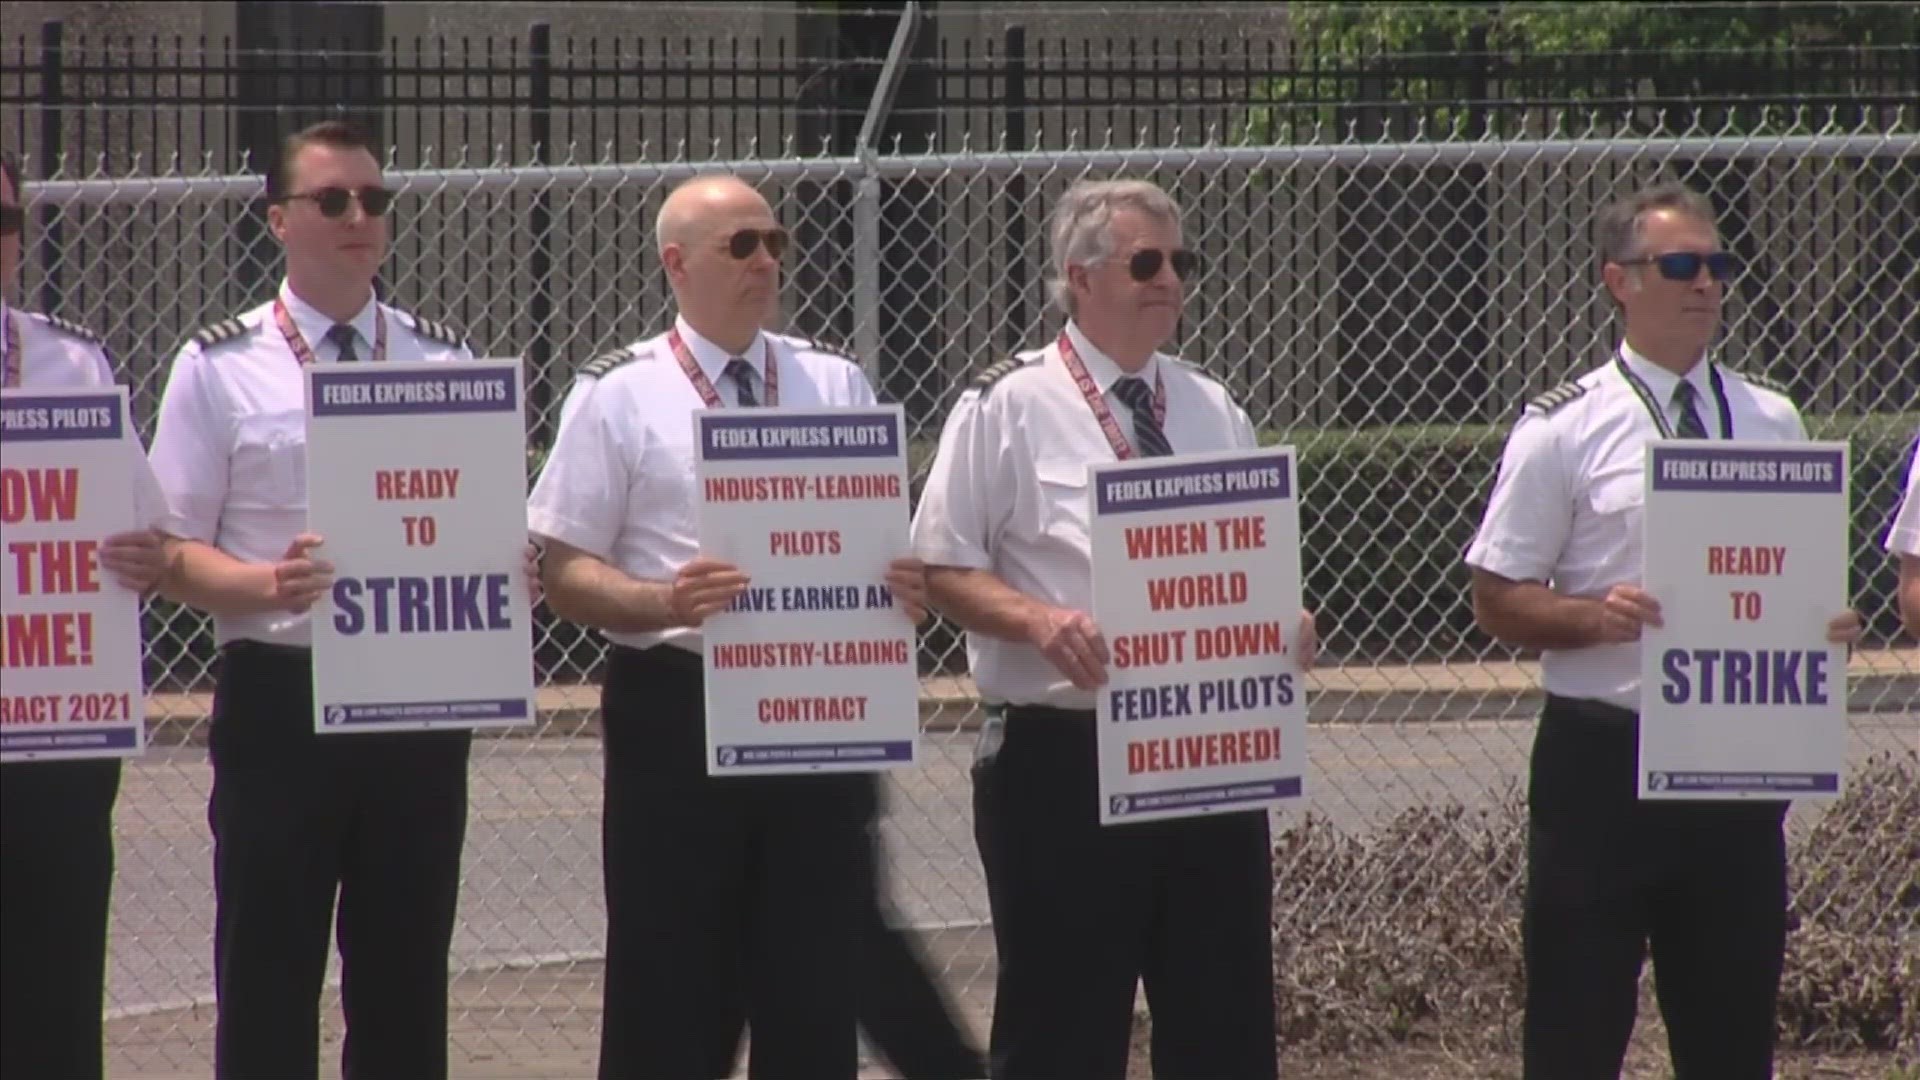 The FedEx Pilot's Association says the company is stalling with pilots on a new collective bargaining agreement.